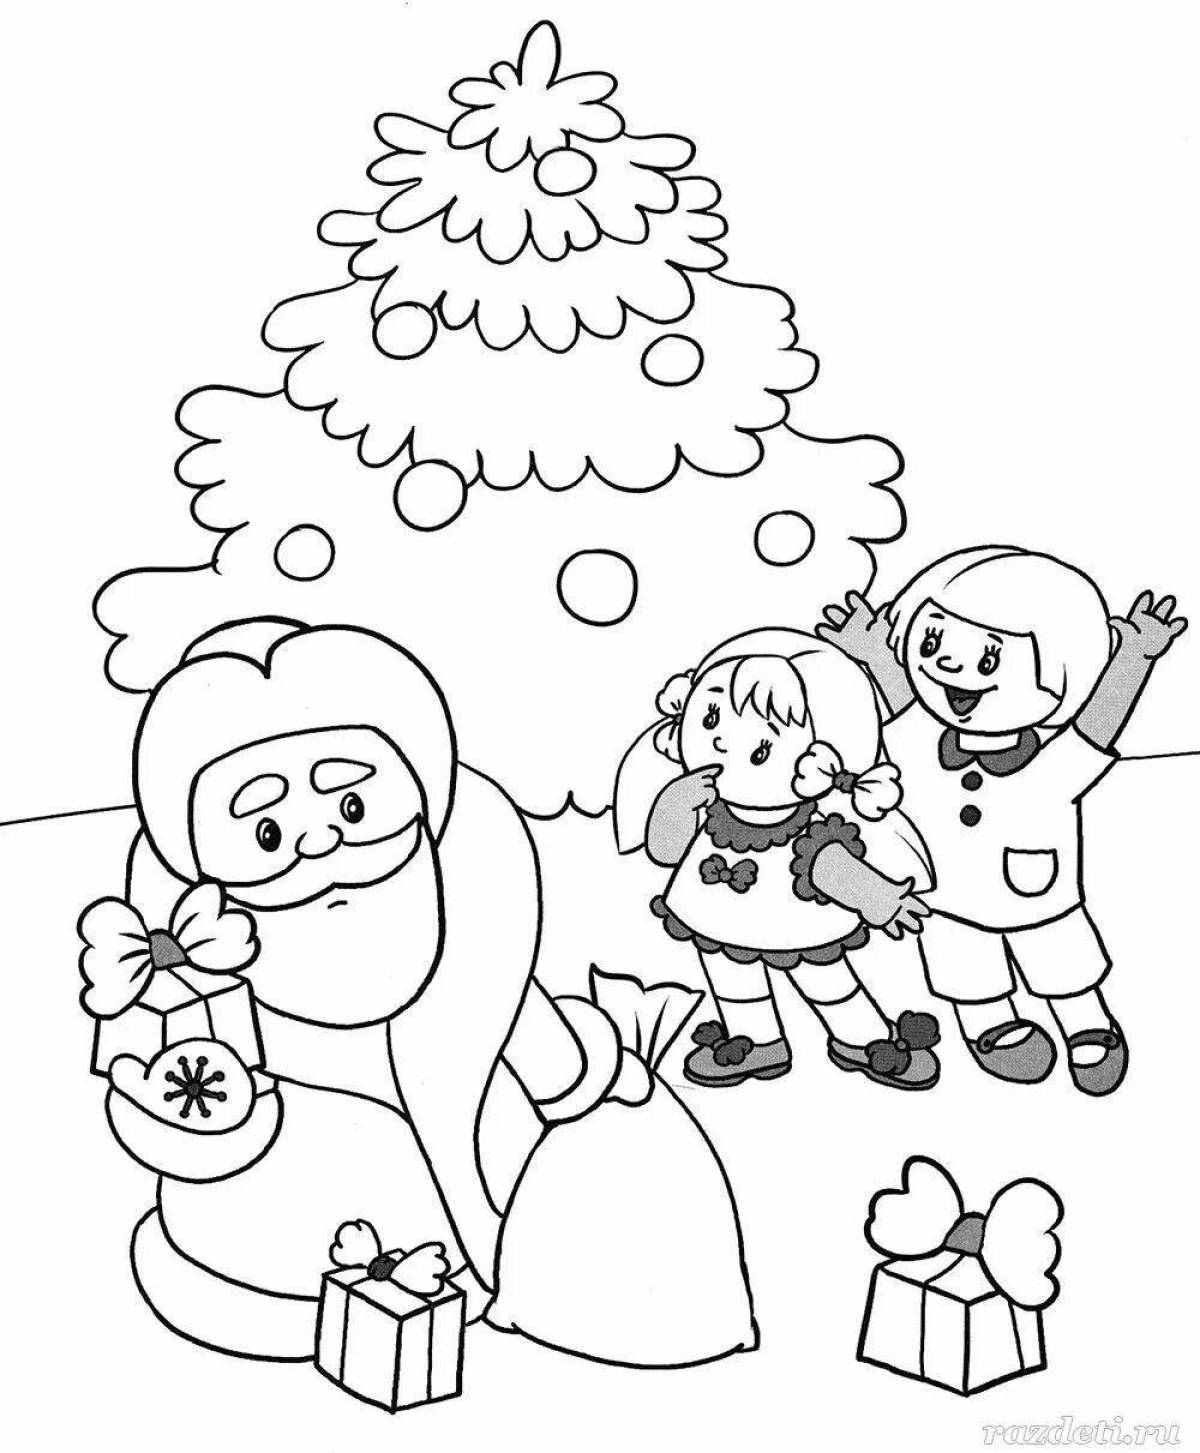 Glitter Christmas coloring book for preschoolers